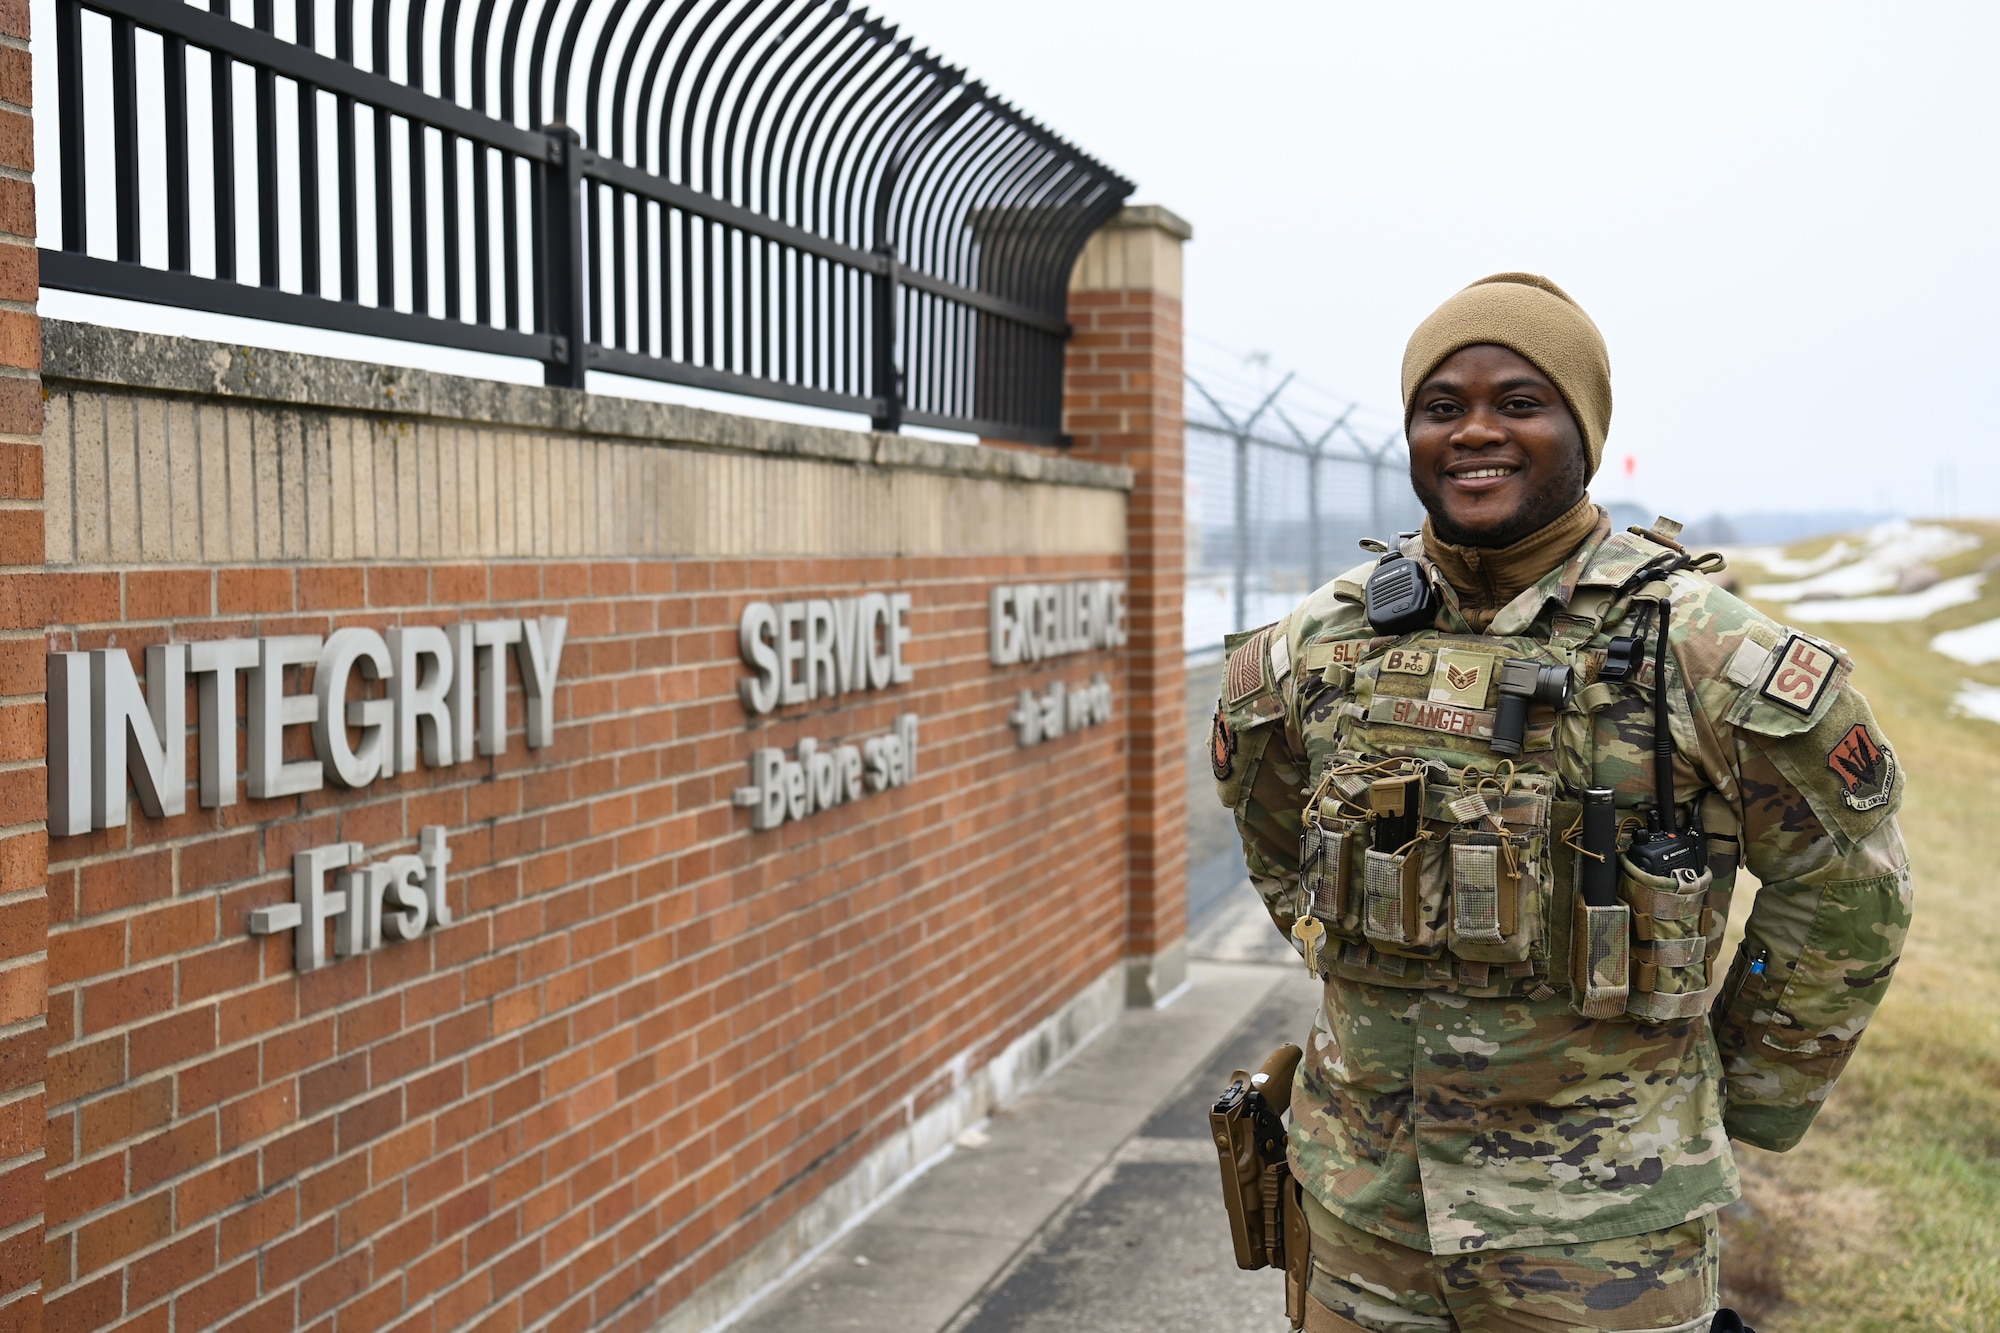 Airman in battle uniform poses for photo outside by a wall bearing the core values of United States Air Force